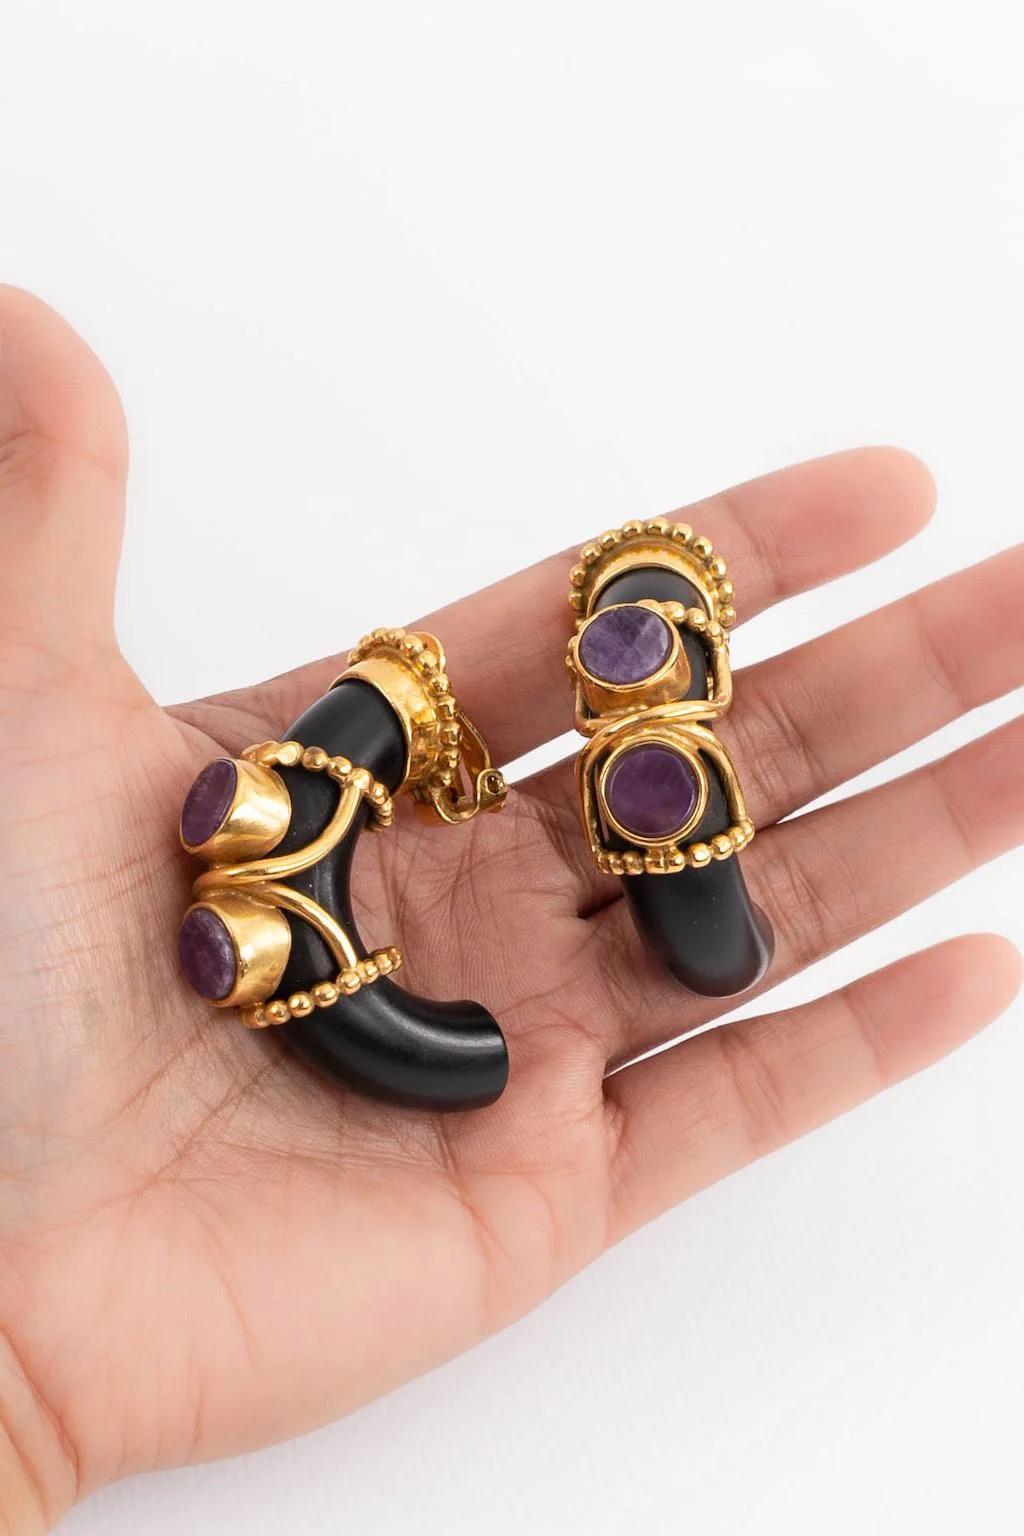 Gilted Metal Clip-on Earrings with Wood and Cabochons in Amethyst Color For Sale 1